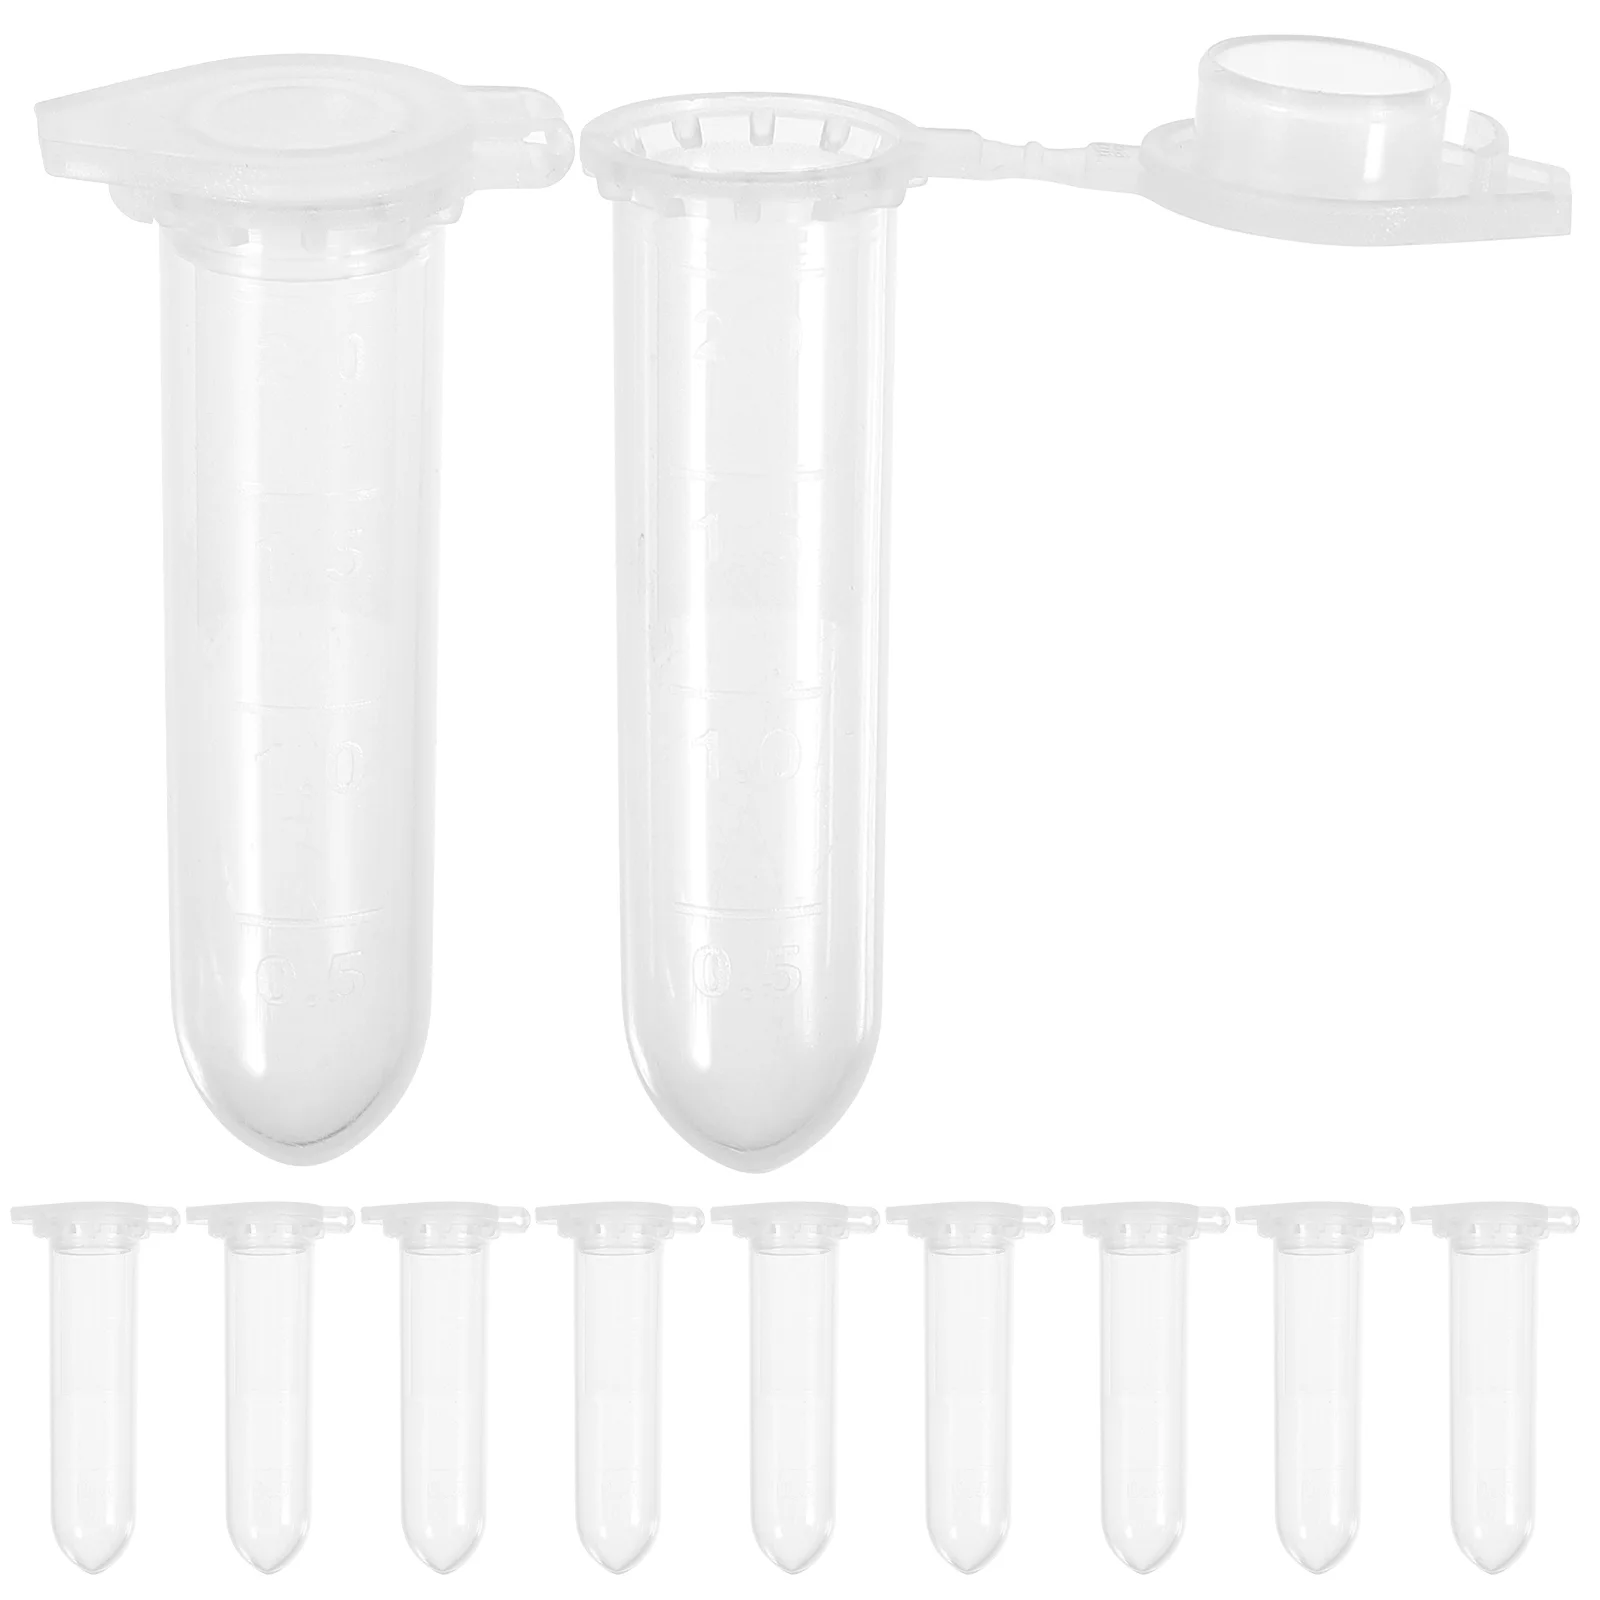 

500 Pcs Plastic Containers Laboratory Supplies Round Bottom Centrifuge Tube Can